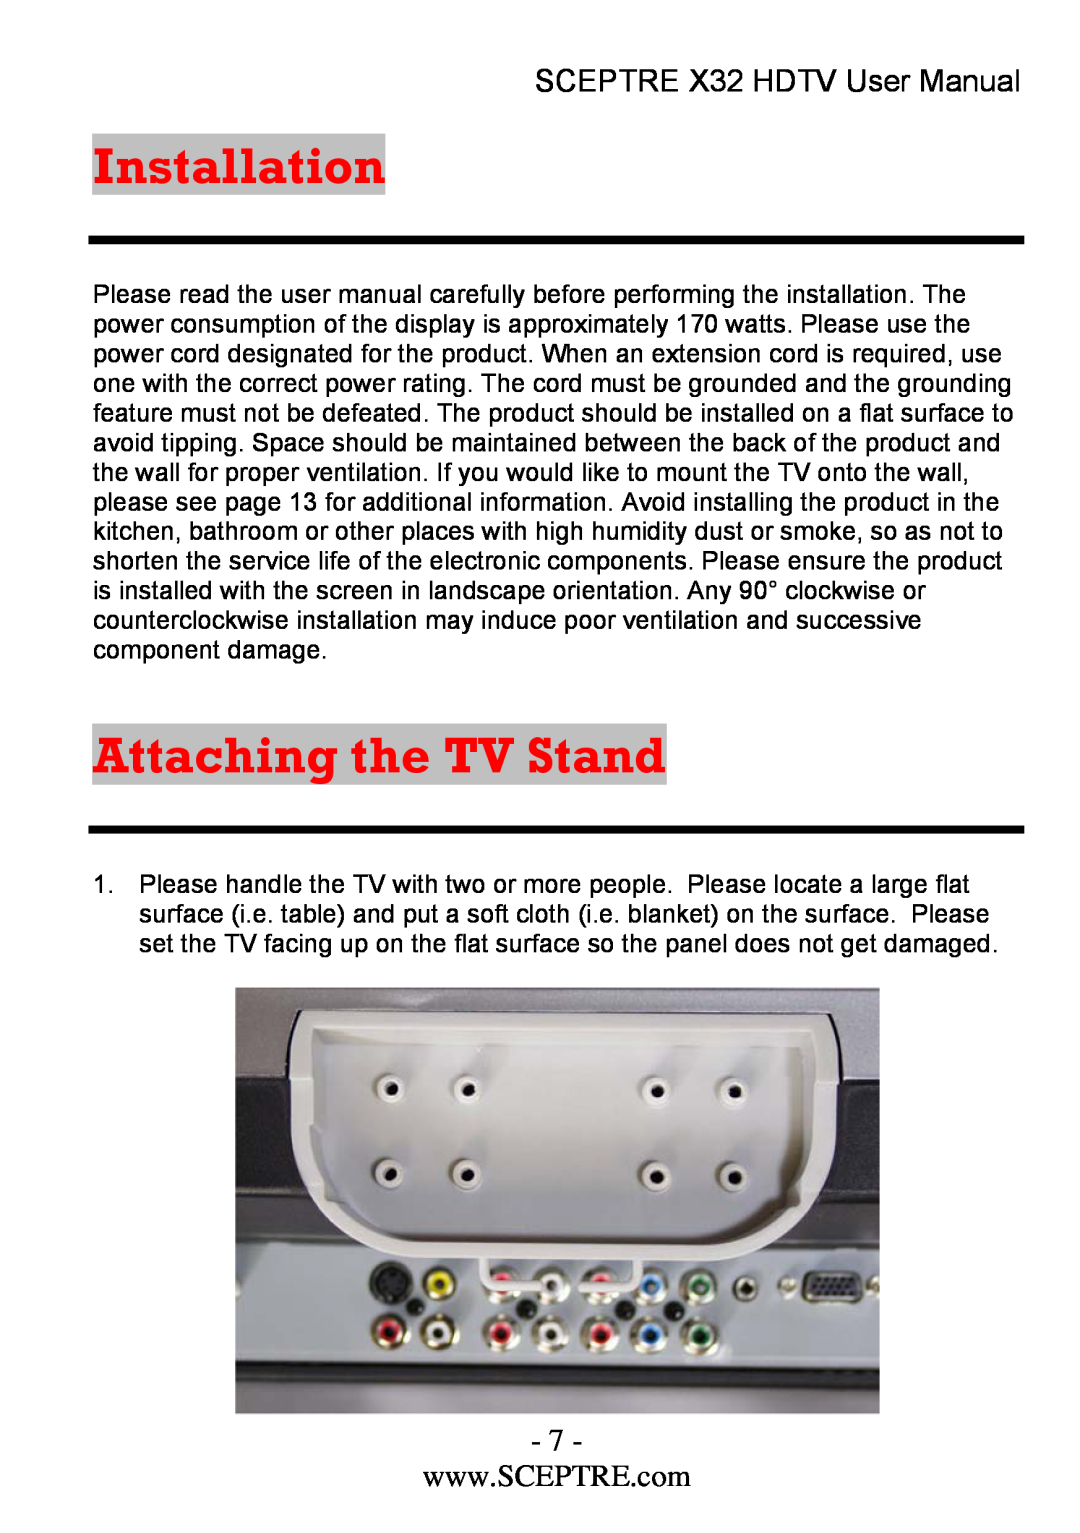 Sceptre Technologies x32 user manual Installation, Attaching the TV Stand, SCEPTRE X32 HDTV User Manual 